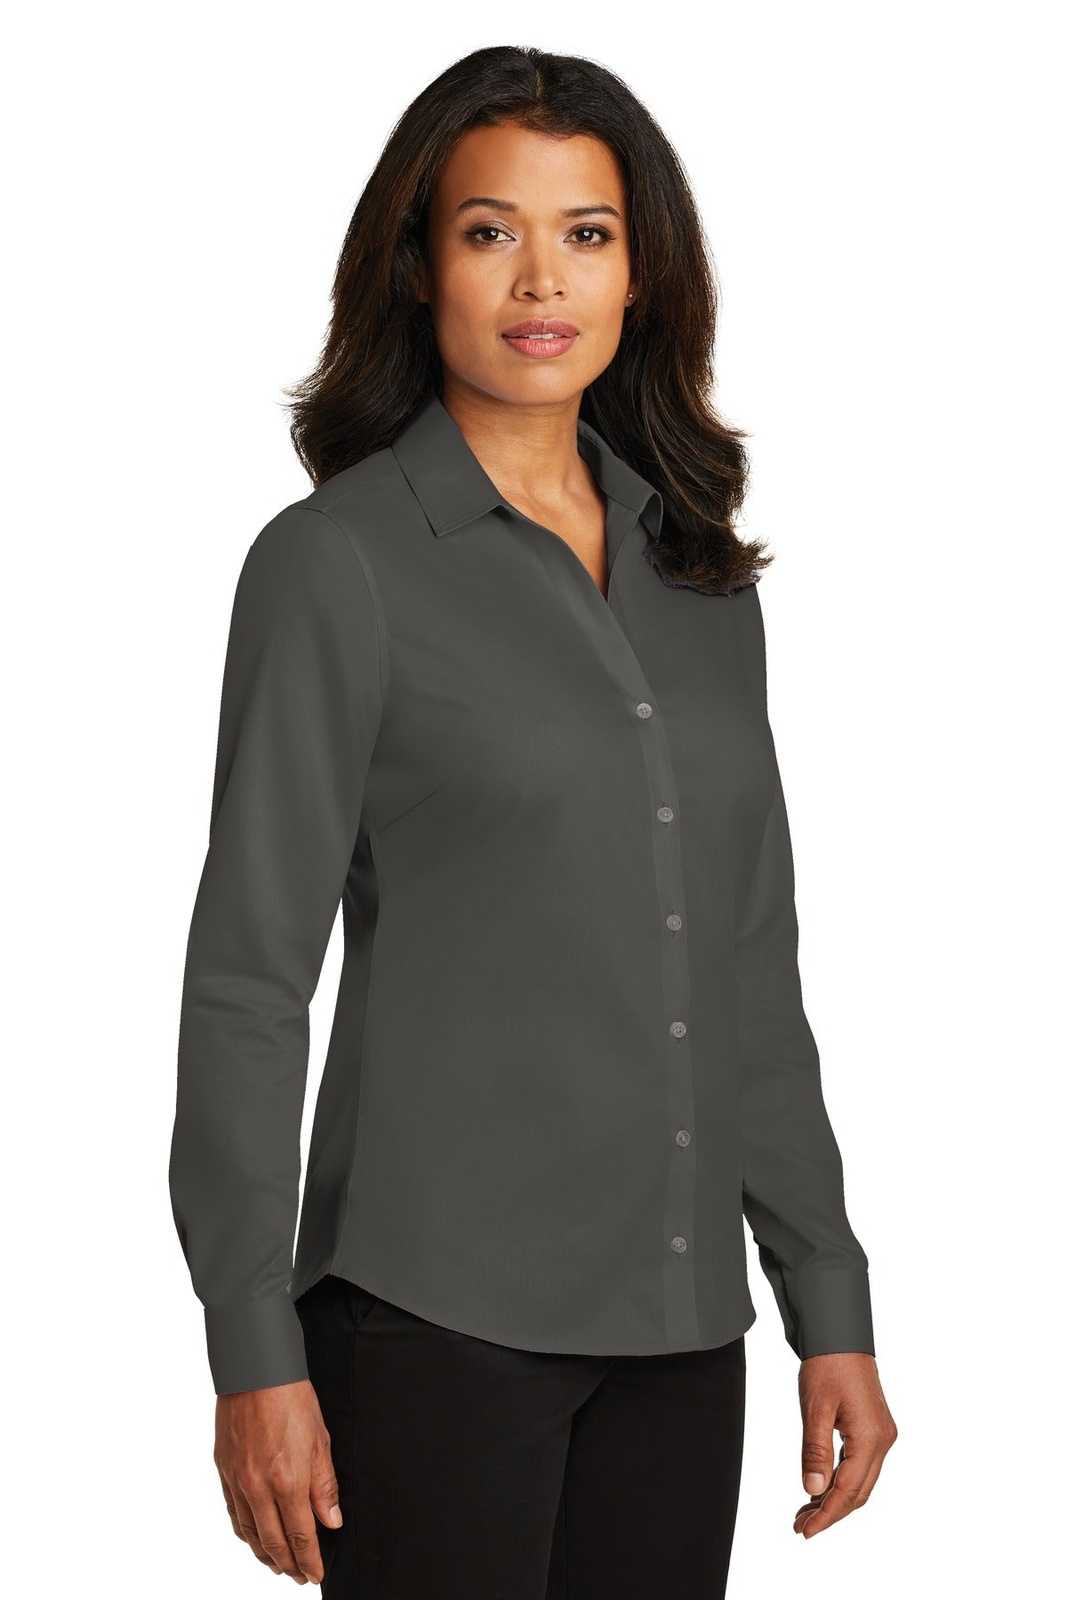 Red House RH79 Ladies Non-Iron Twill Shirt - Gray Steel - HIT a Double - 4